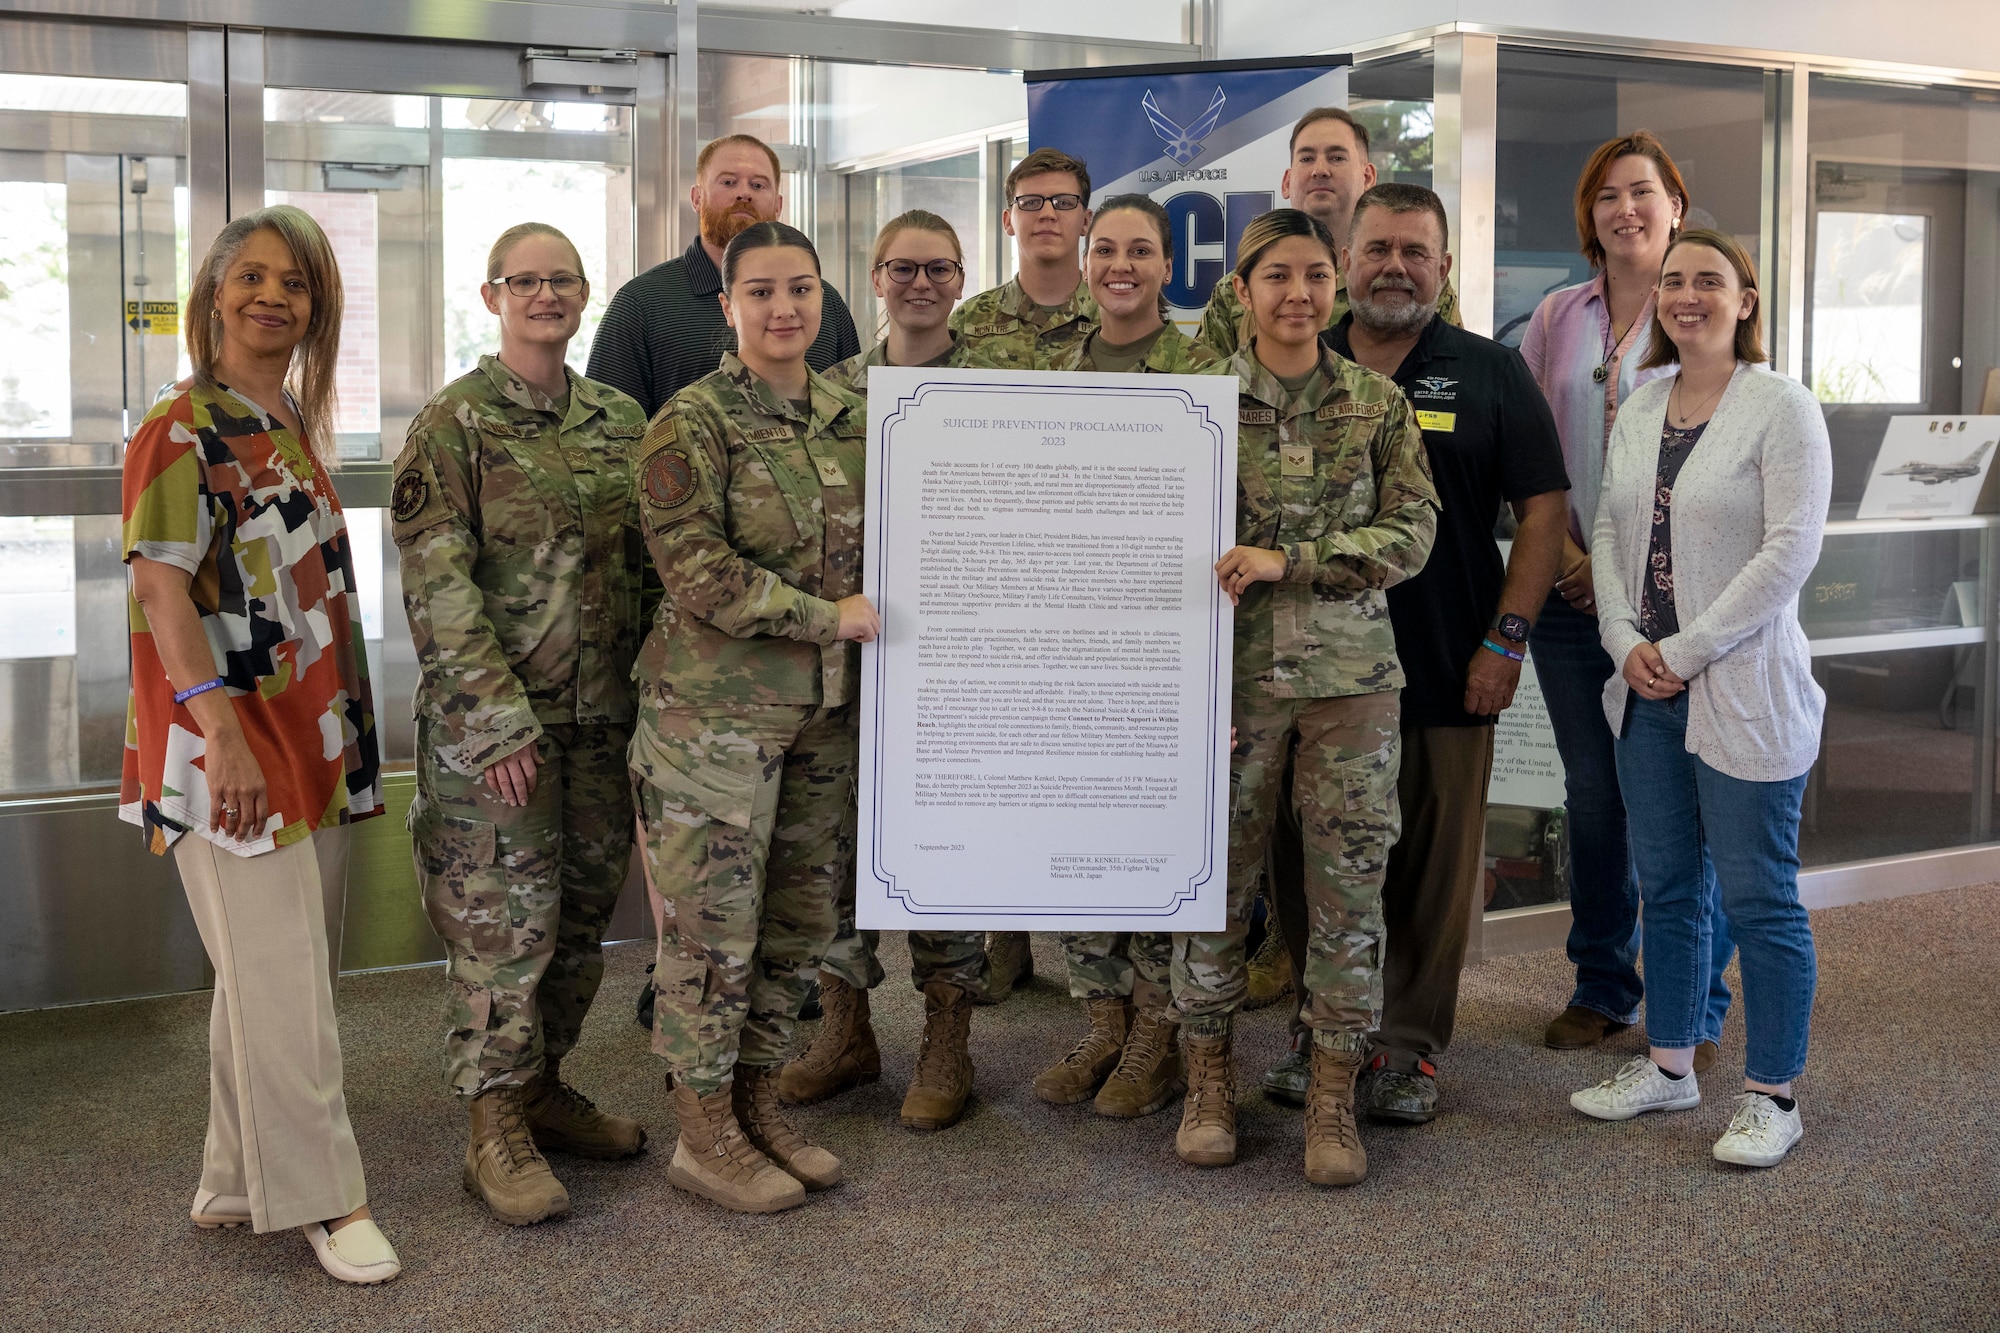 35th Fighter Wing suicide prevention facilitators stand with Misawa’s Suicide Prevention Proclamation at Misawa Air Base, Japan.